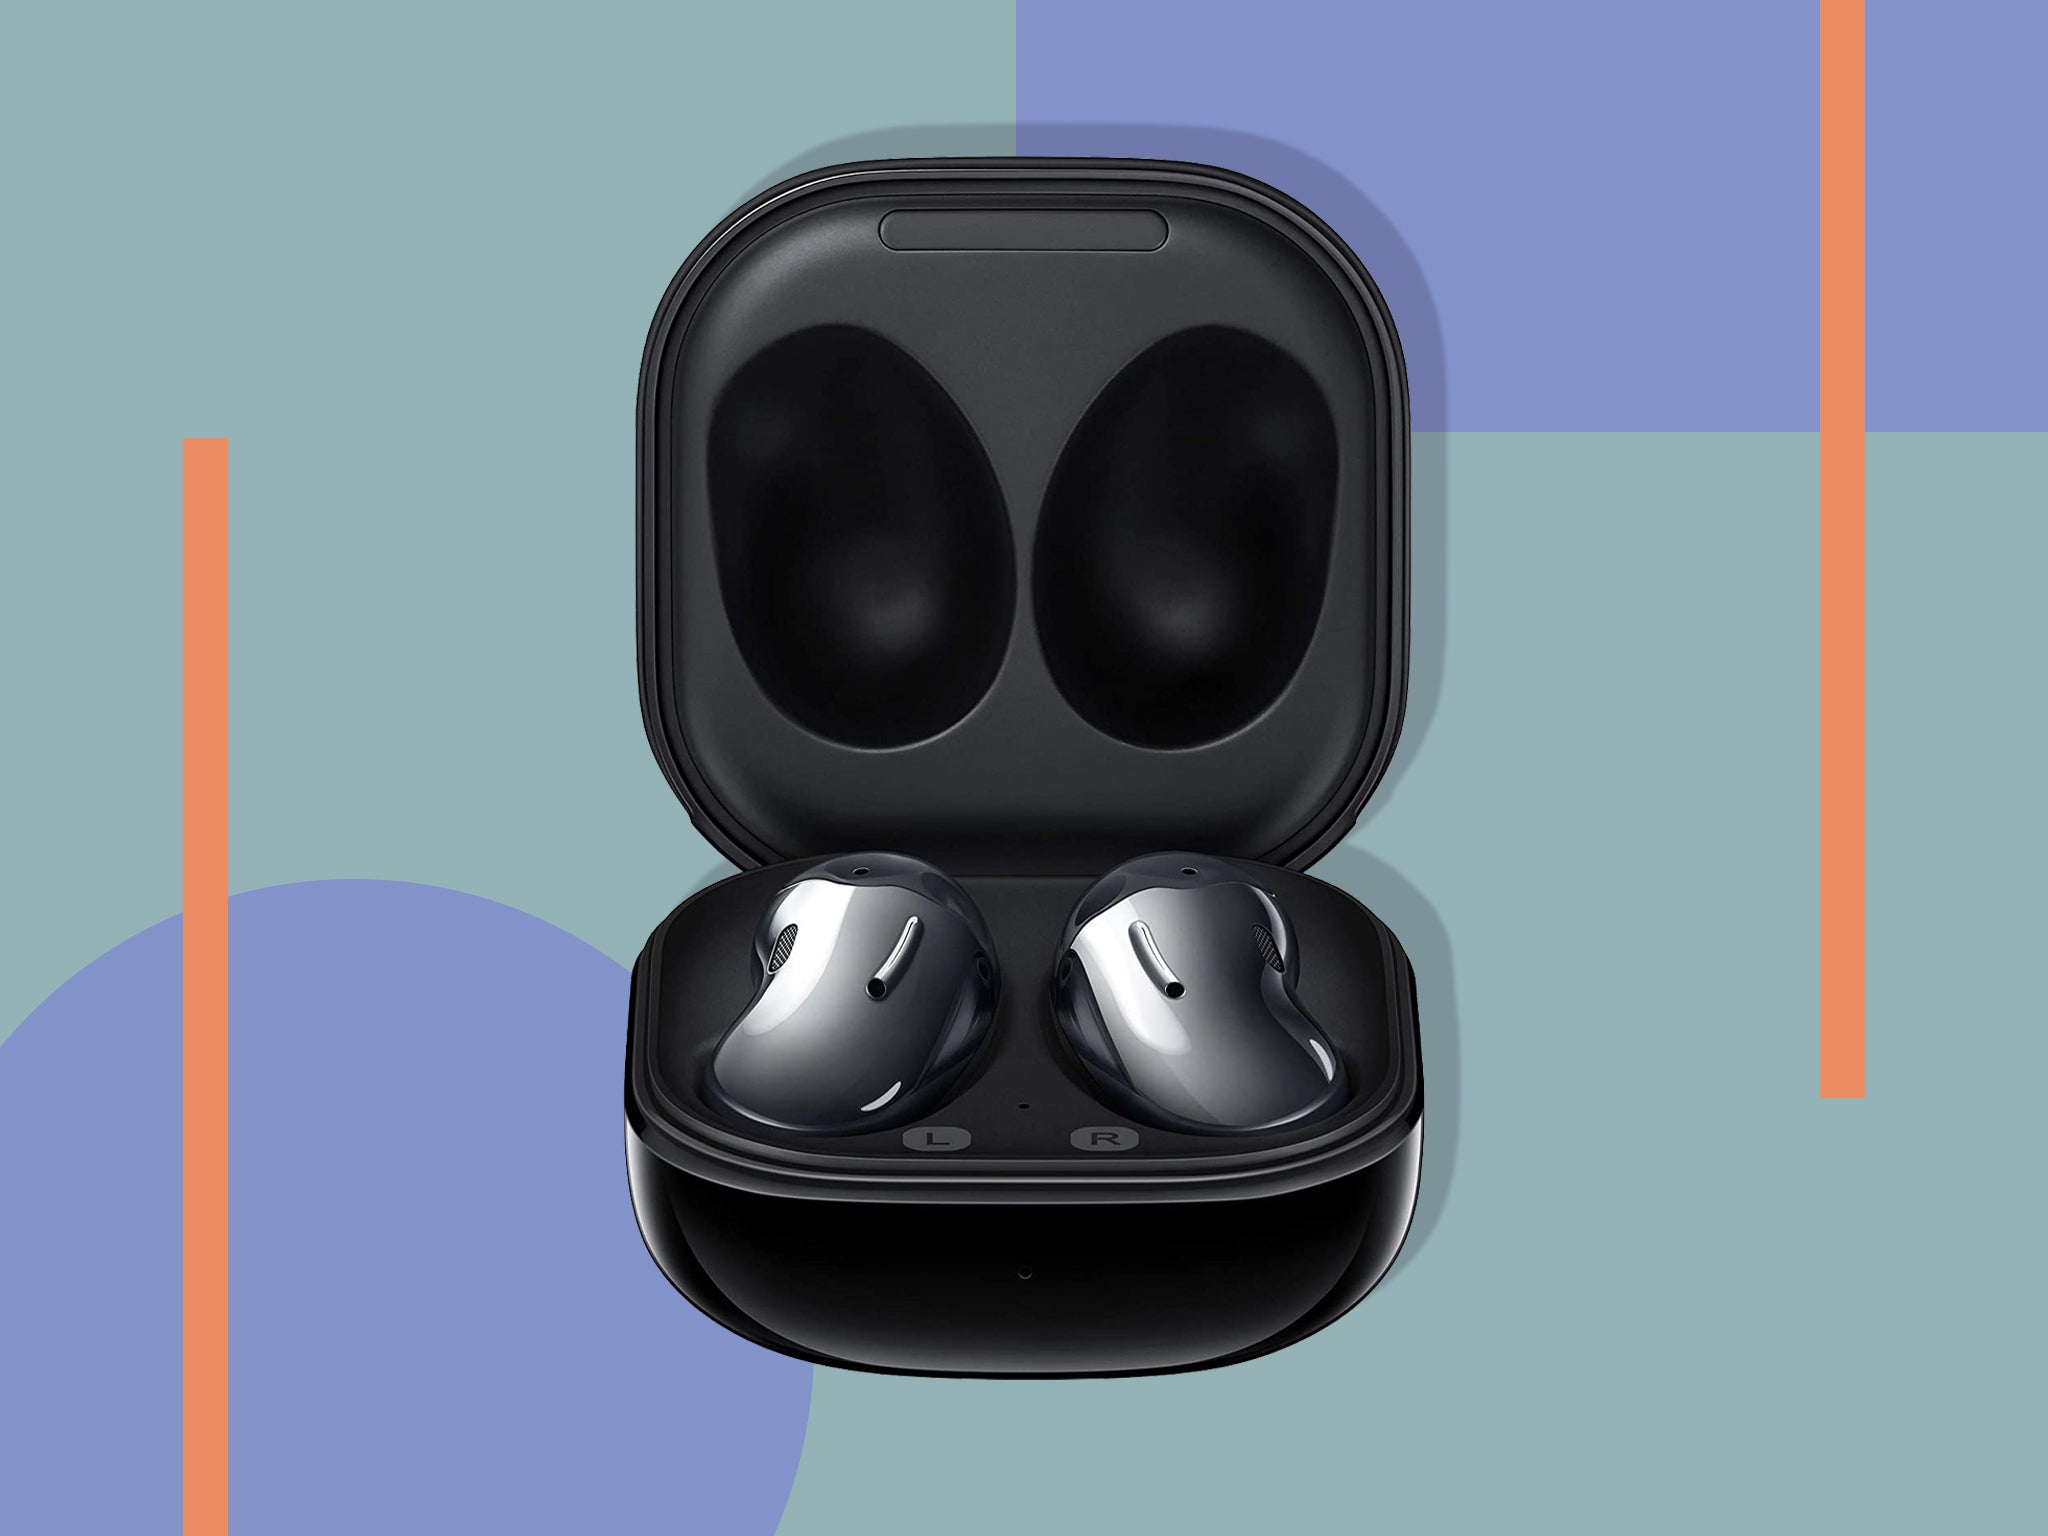 Samsung Galaxy buds live discount: Save £100 on the wireless 